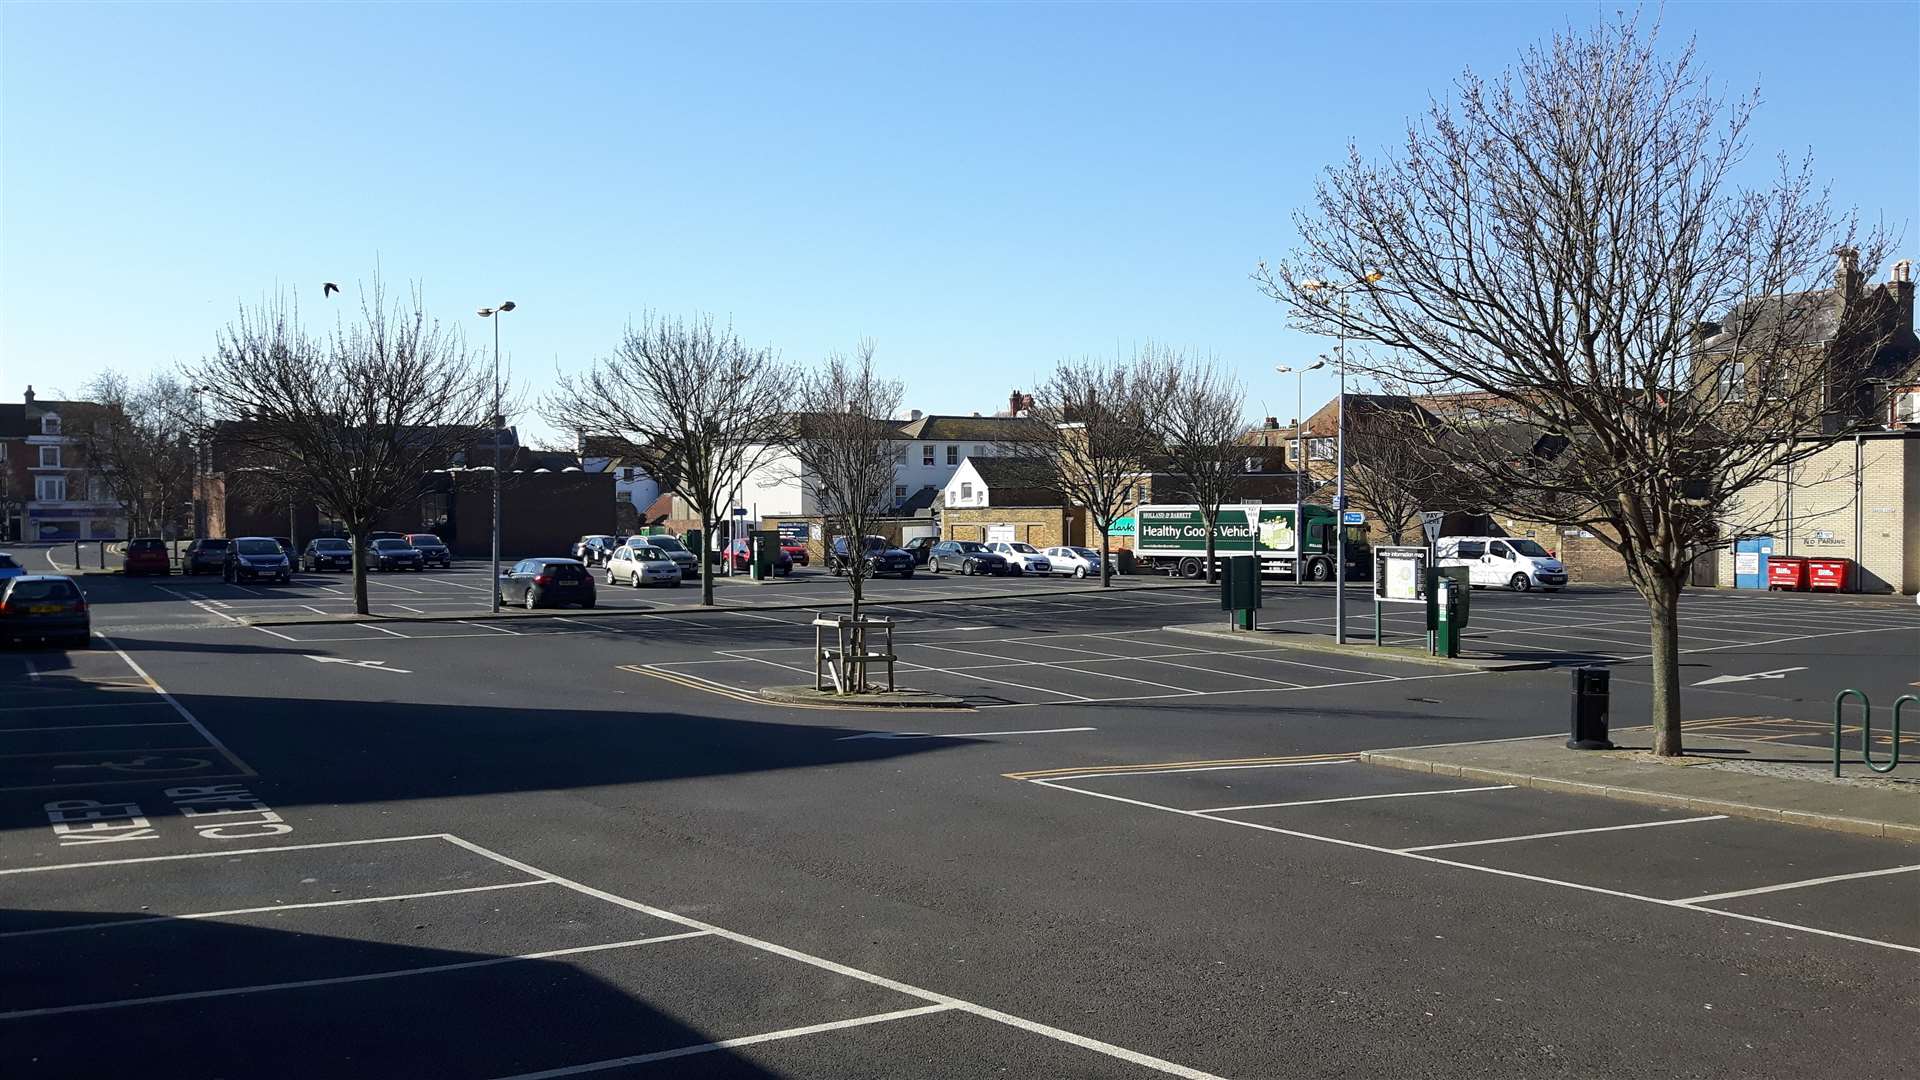 Car parks across the district will be free on all Saturdays in December